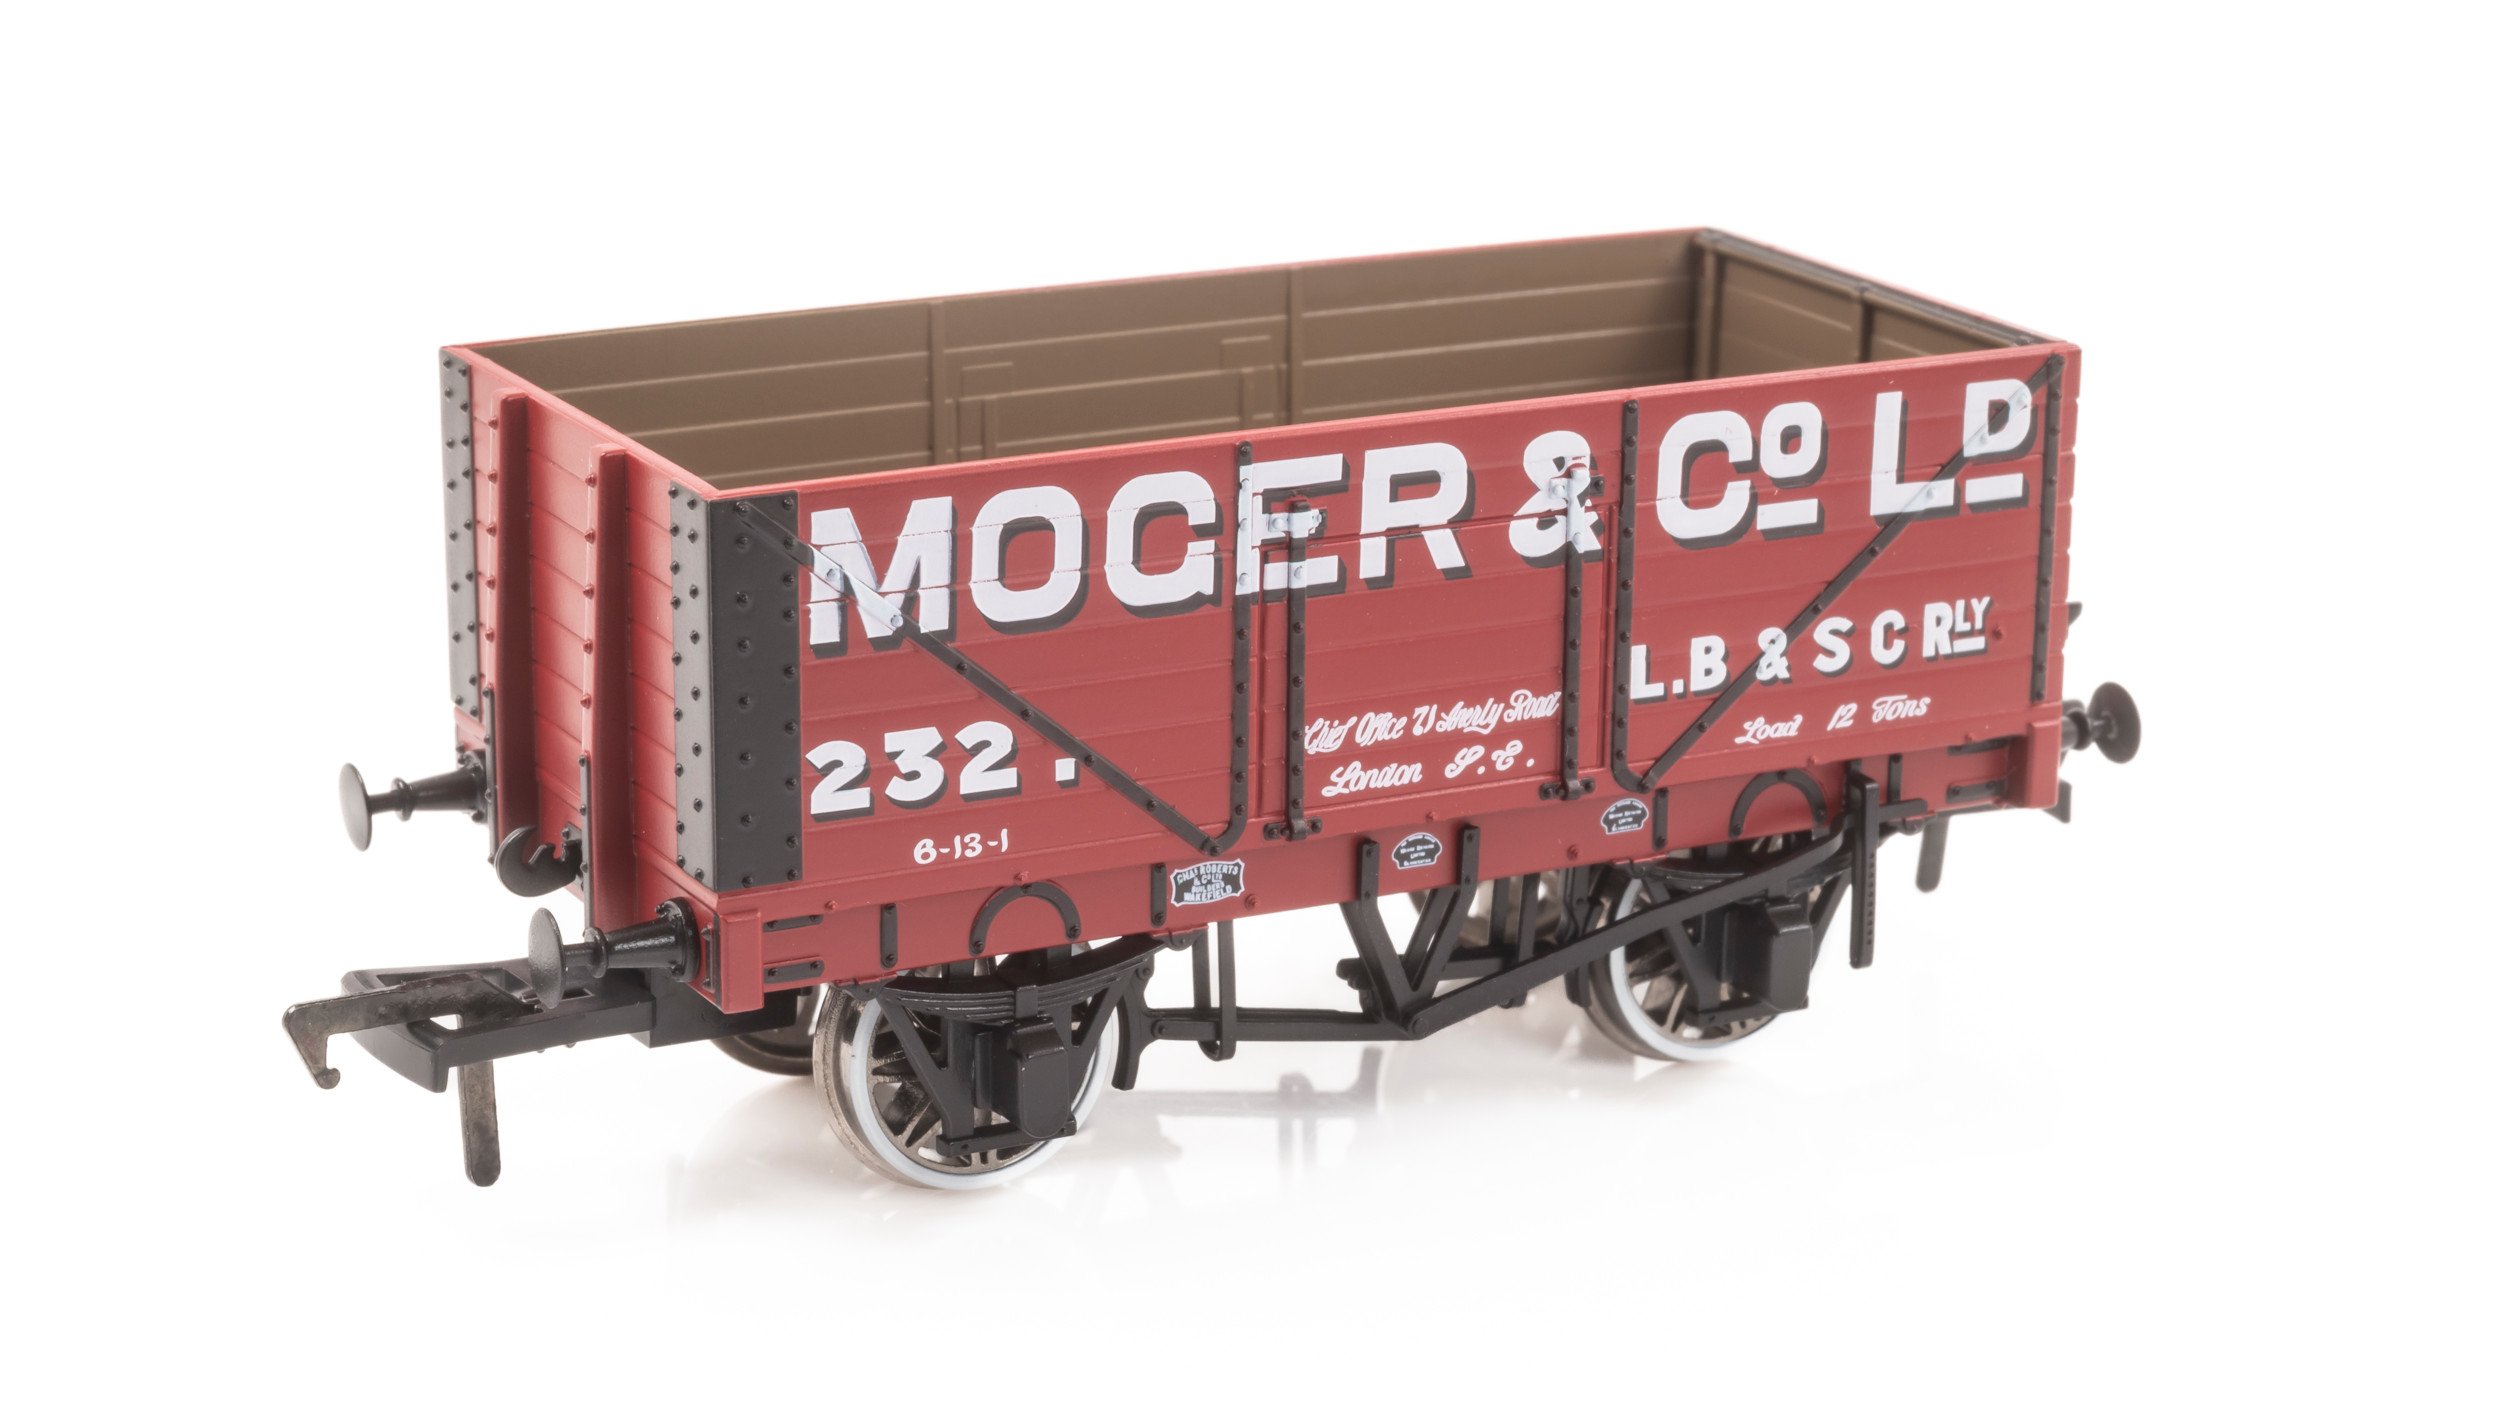 Kernow Model Rail Centre's new RCH 1907 wagon uses the same tooling as the main range from Rapido Trains UK.